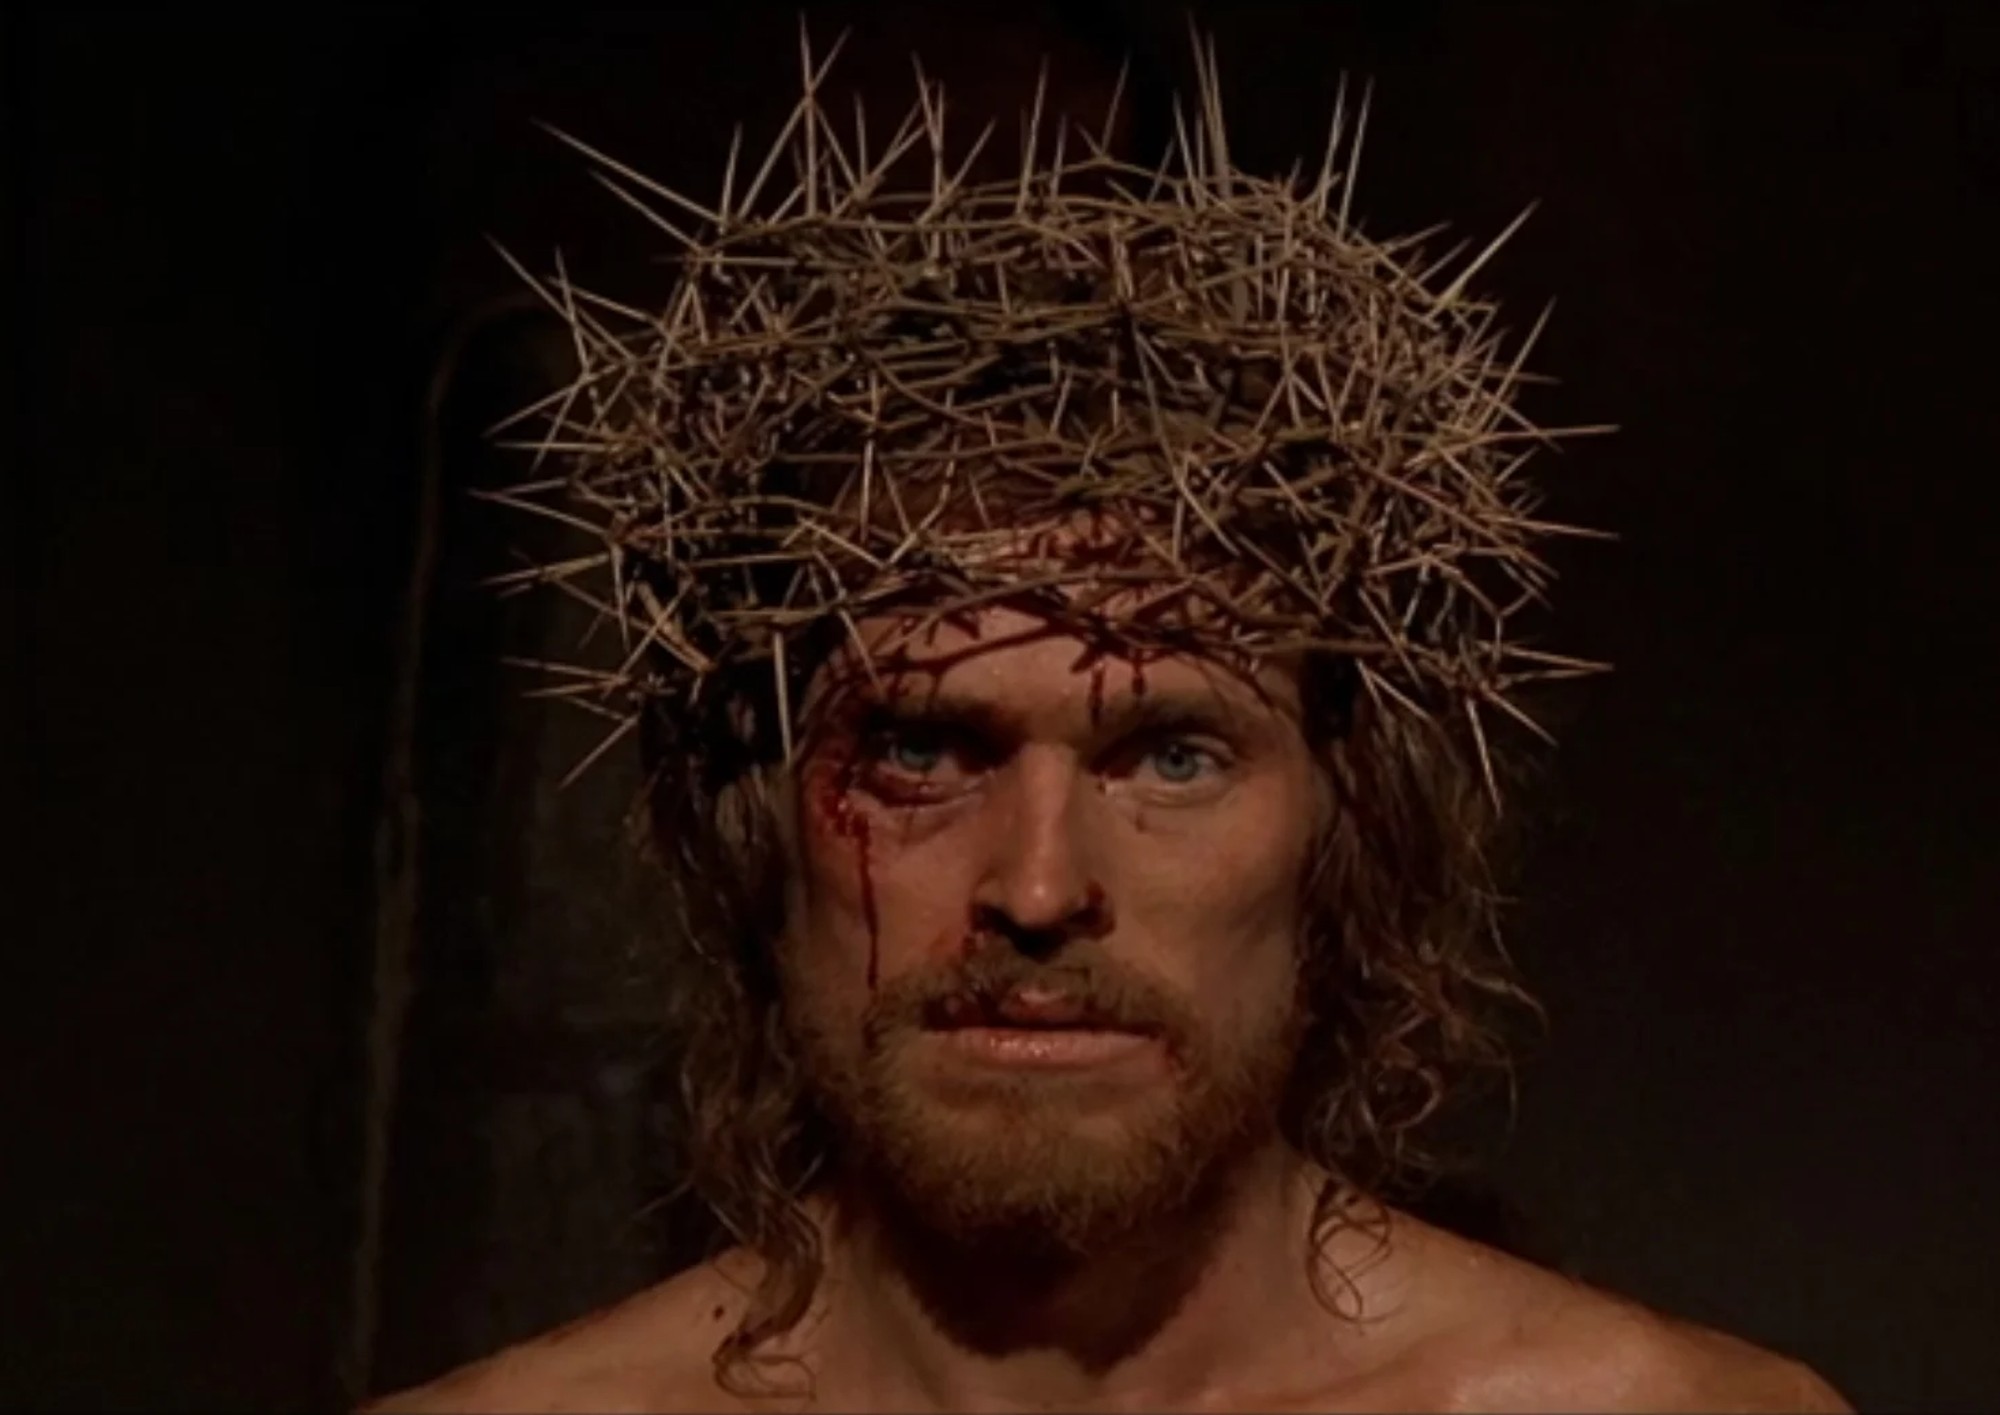 Image from the motion picture The Last Temptation of Christ